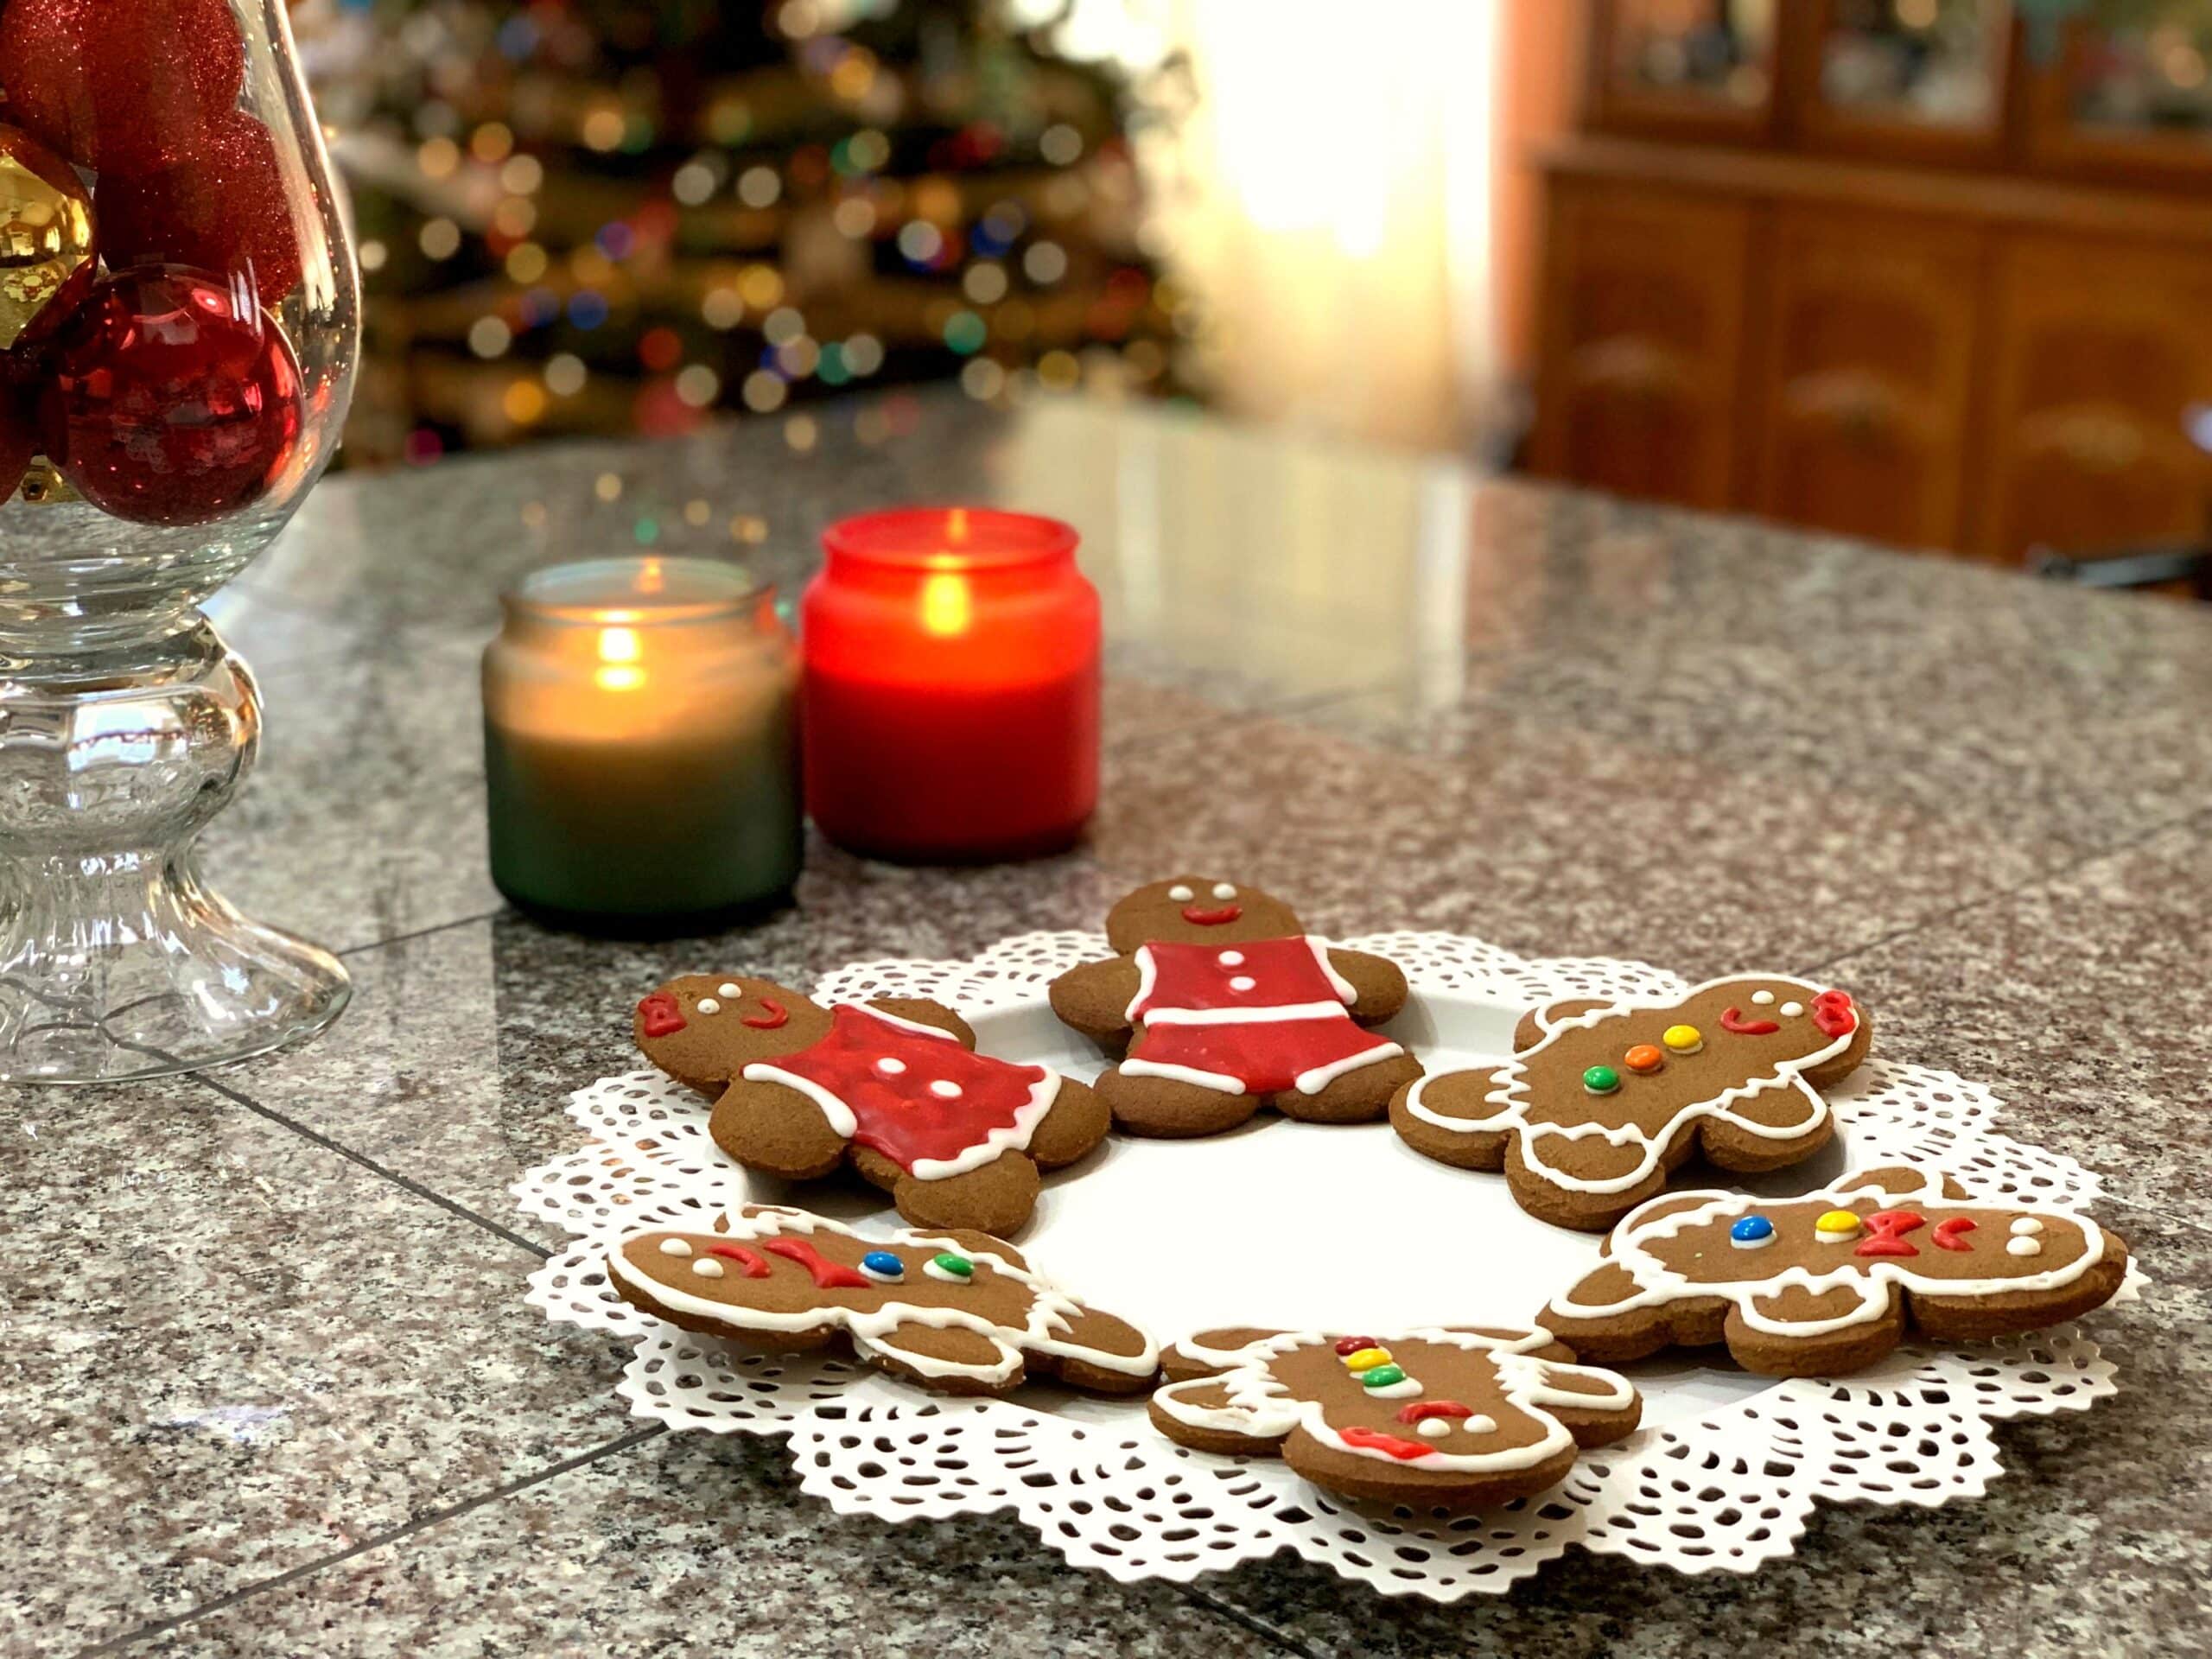 Gingerbread Cookie Recipes (Regular and Gluten Free) for Families